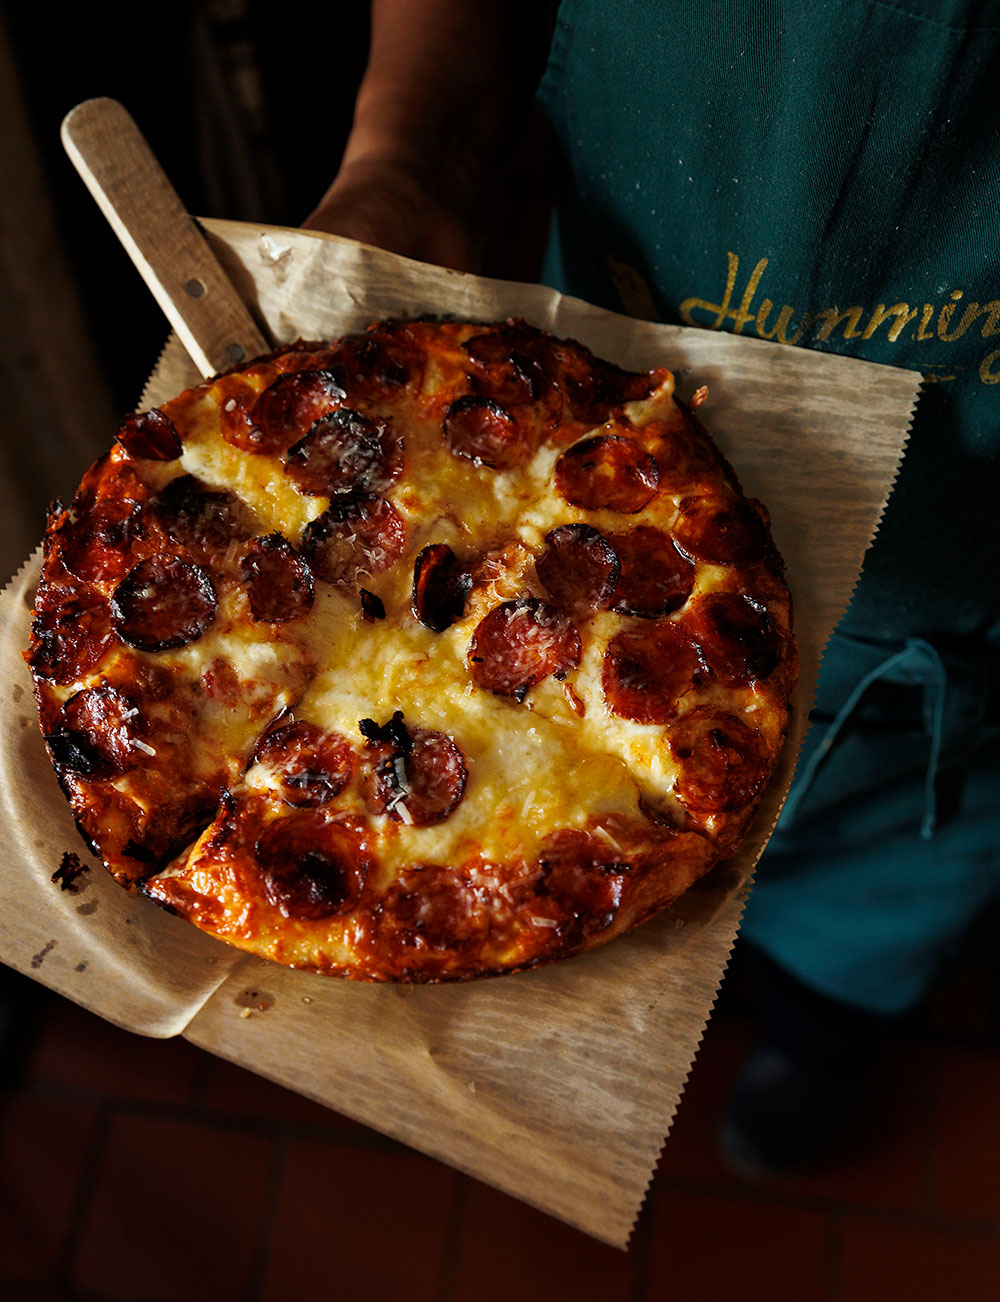 Introduced during the pandemic, Hummingbird's cast iron pizzas have found a home on the menu.